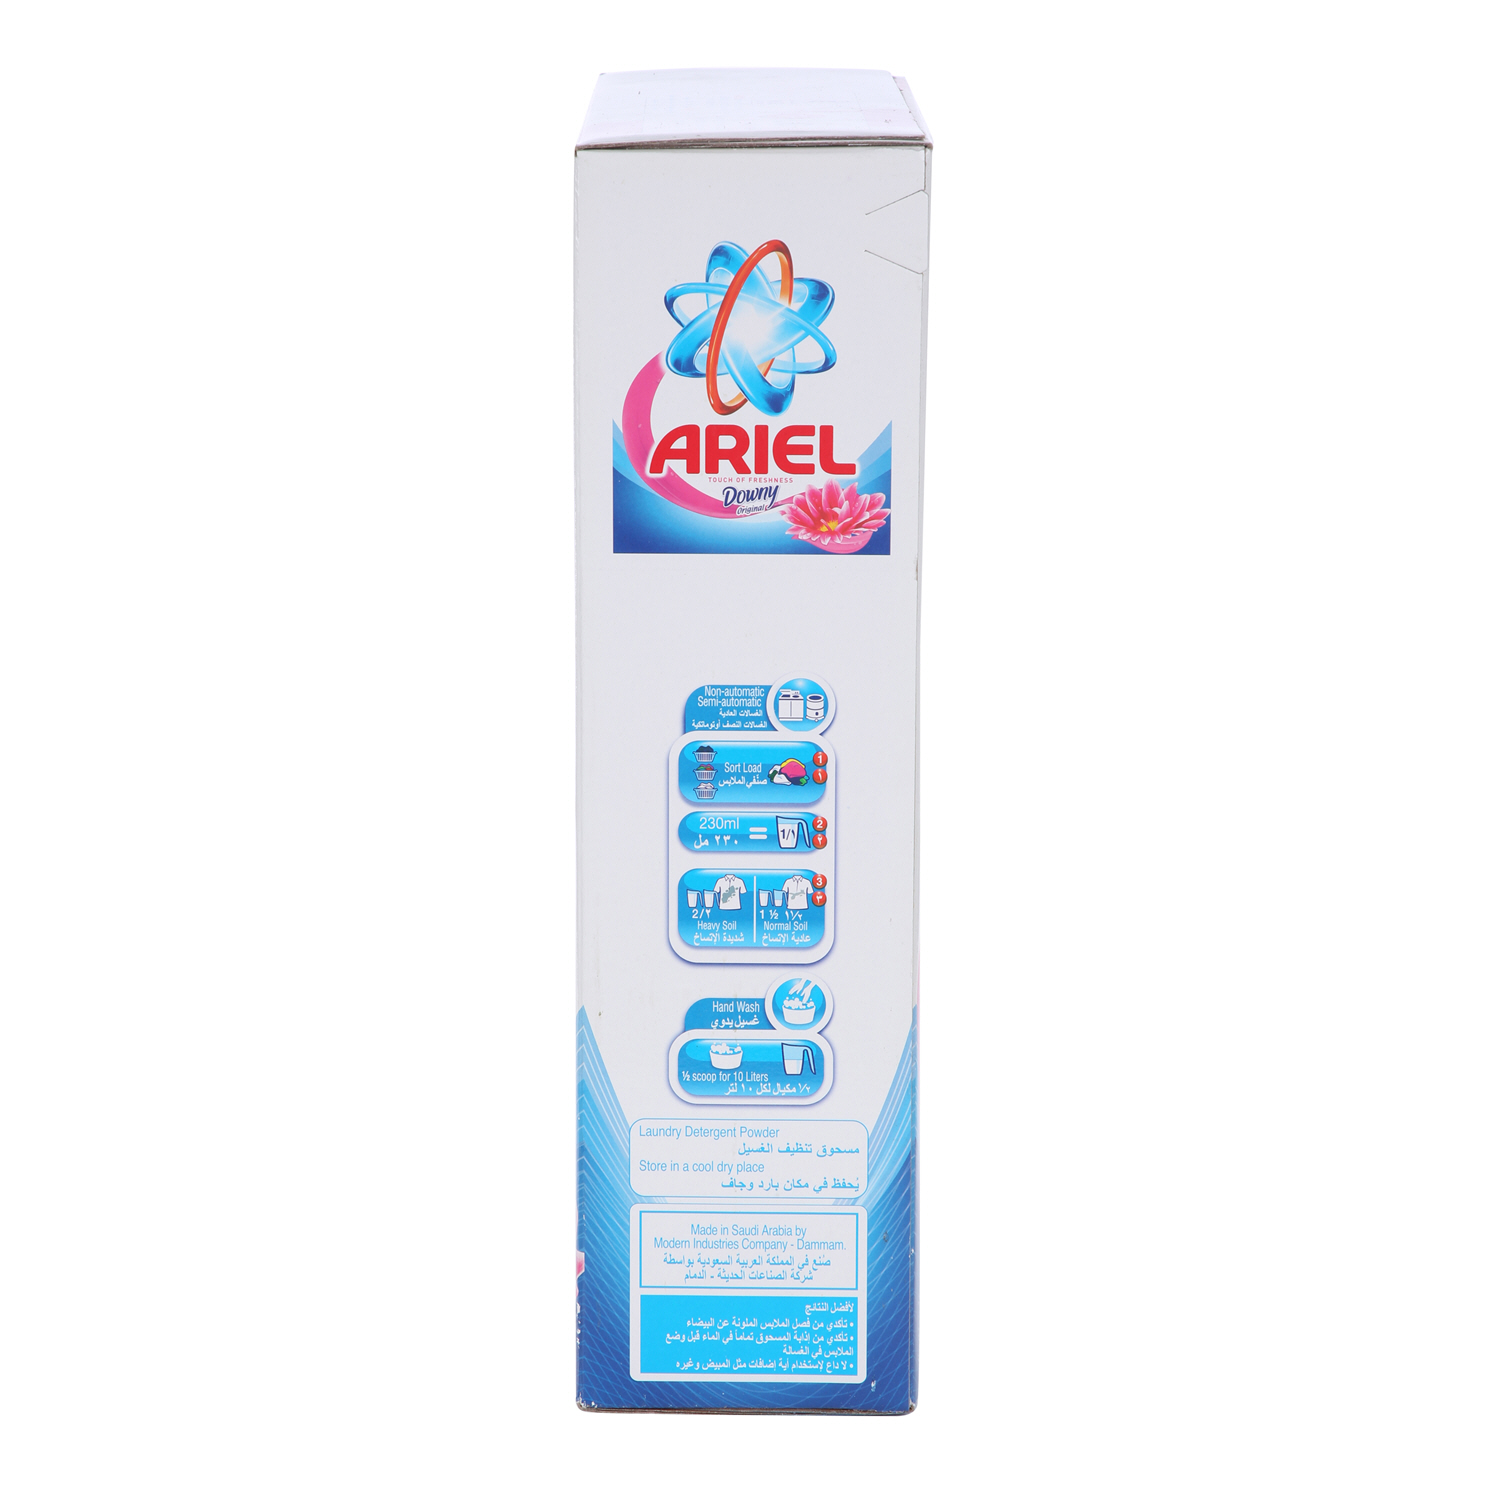 Ariel Detergent Concentrated Green Automatic with Downy Original 4.5 Kg